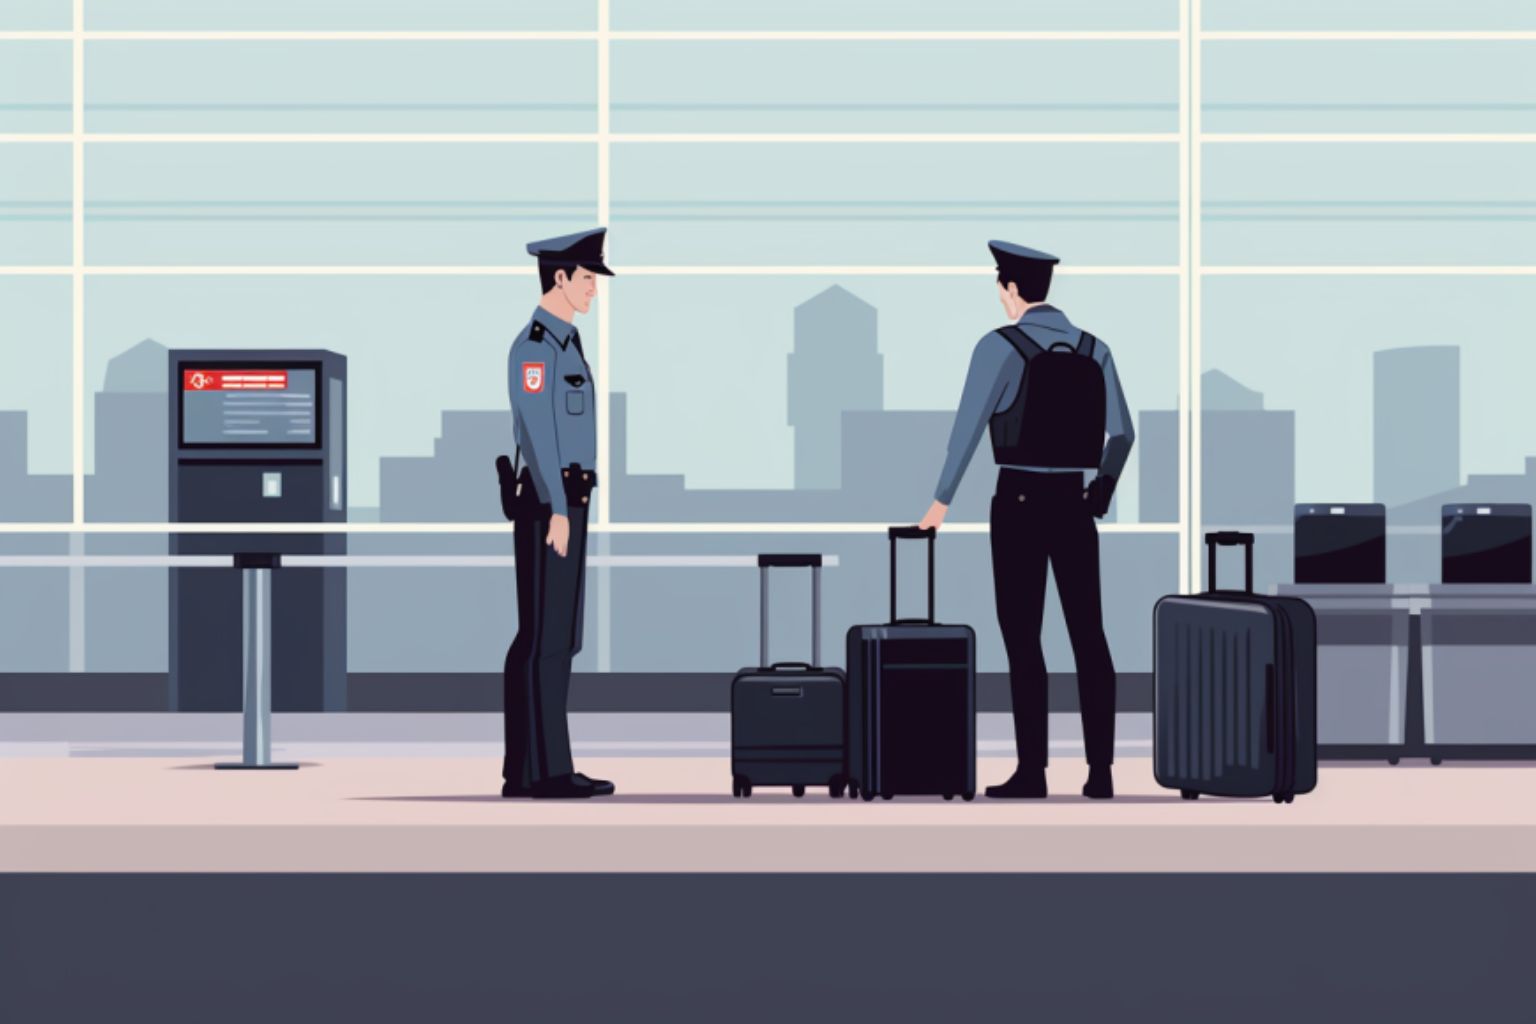 Guess what? The TSA’s controversial full-body scanners are safe, after all. The agency is working hard to repair its tarnished image, too.